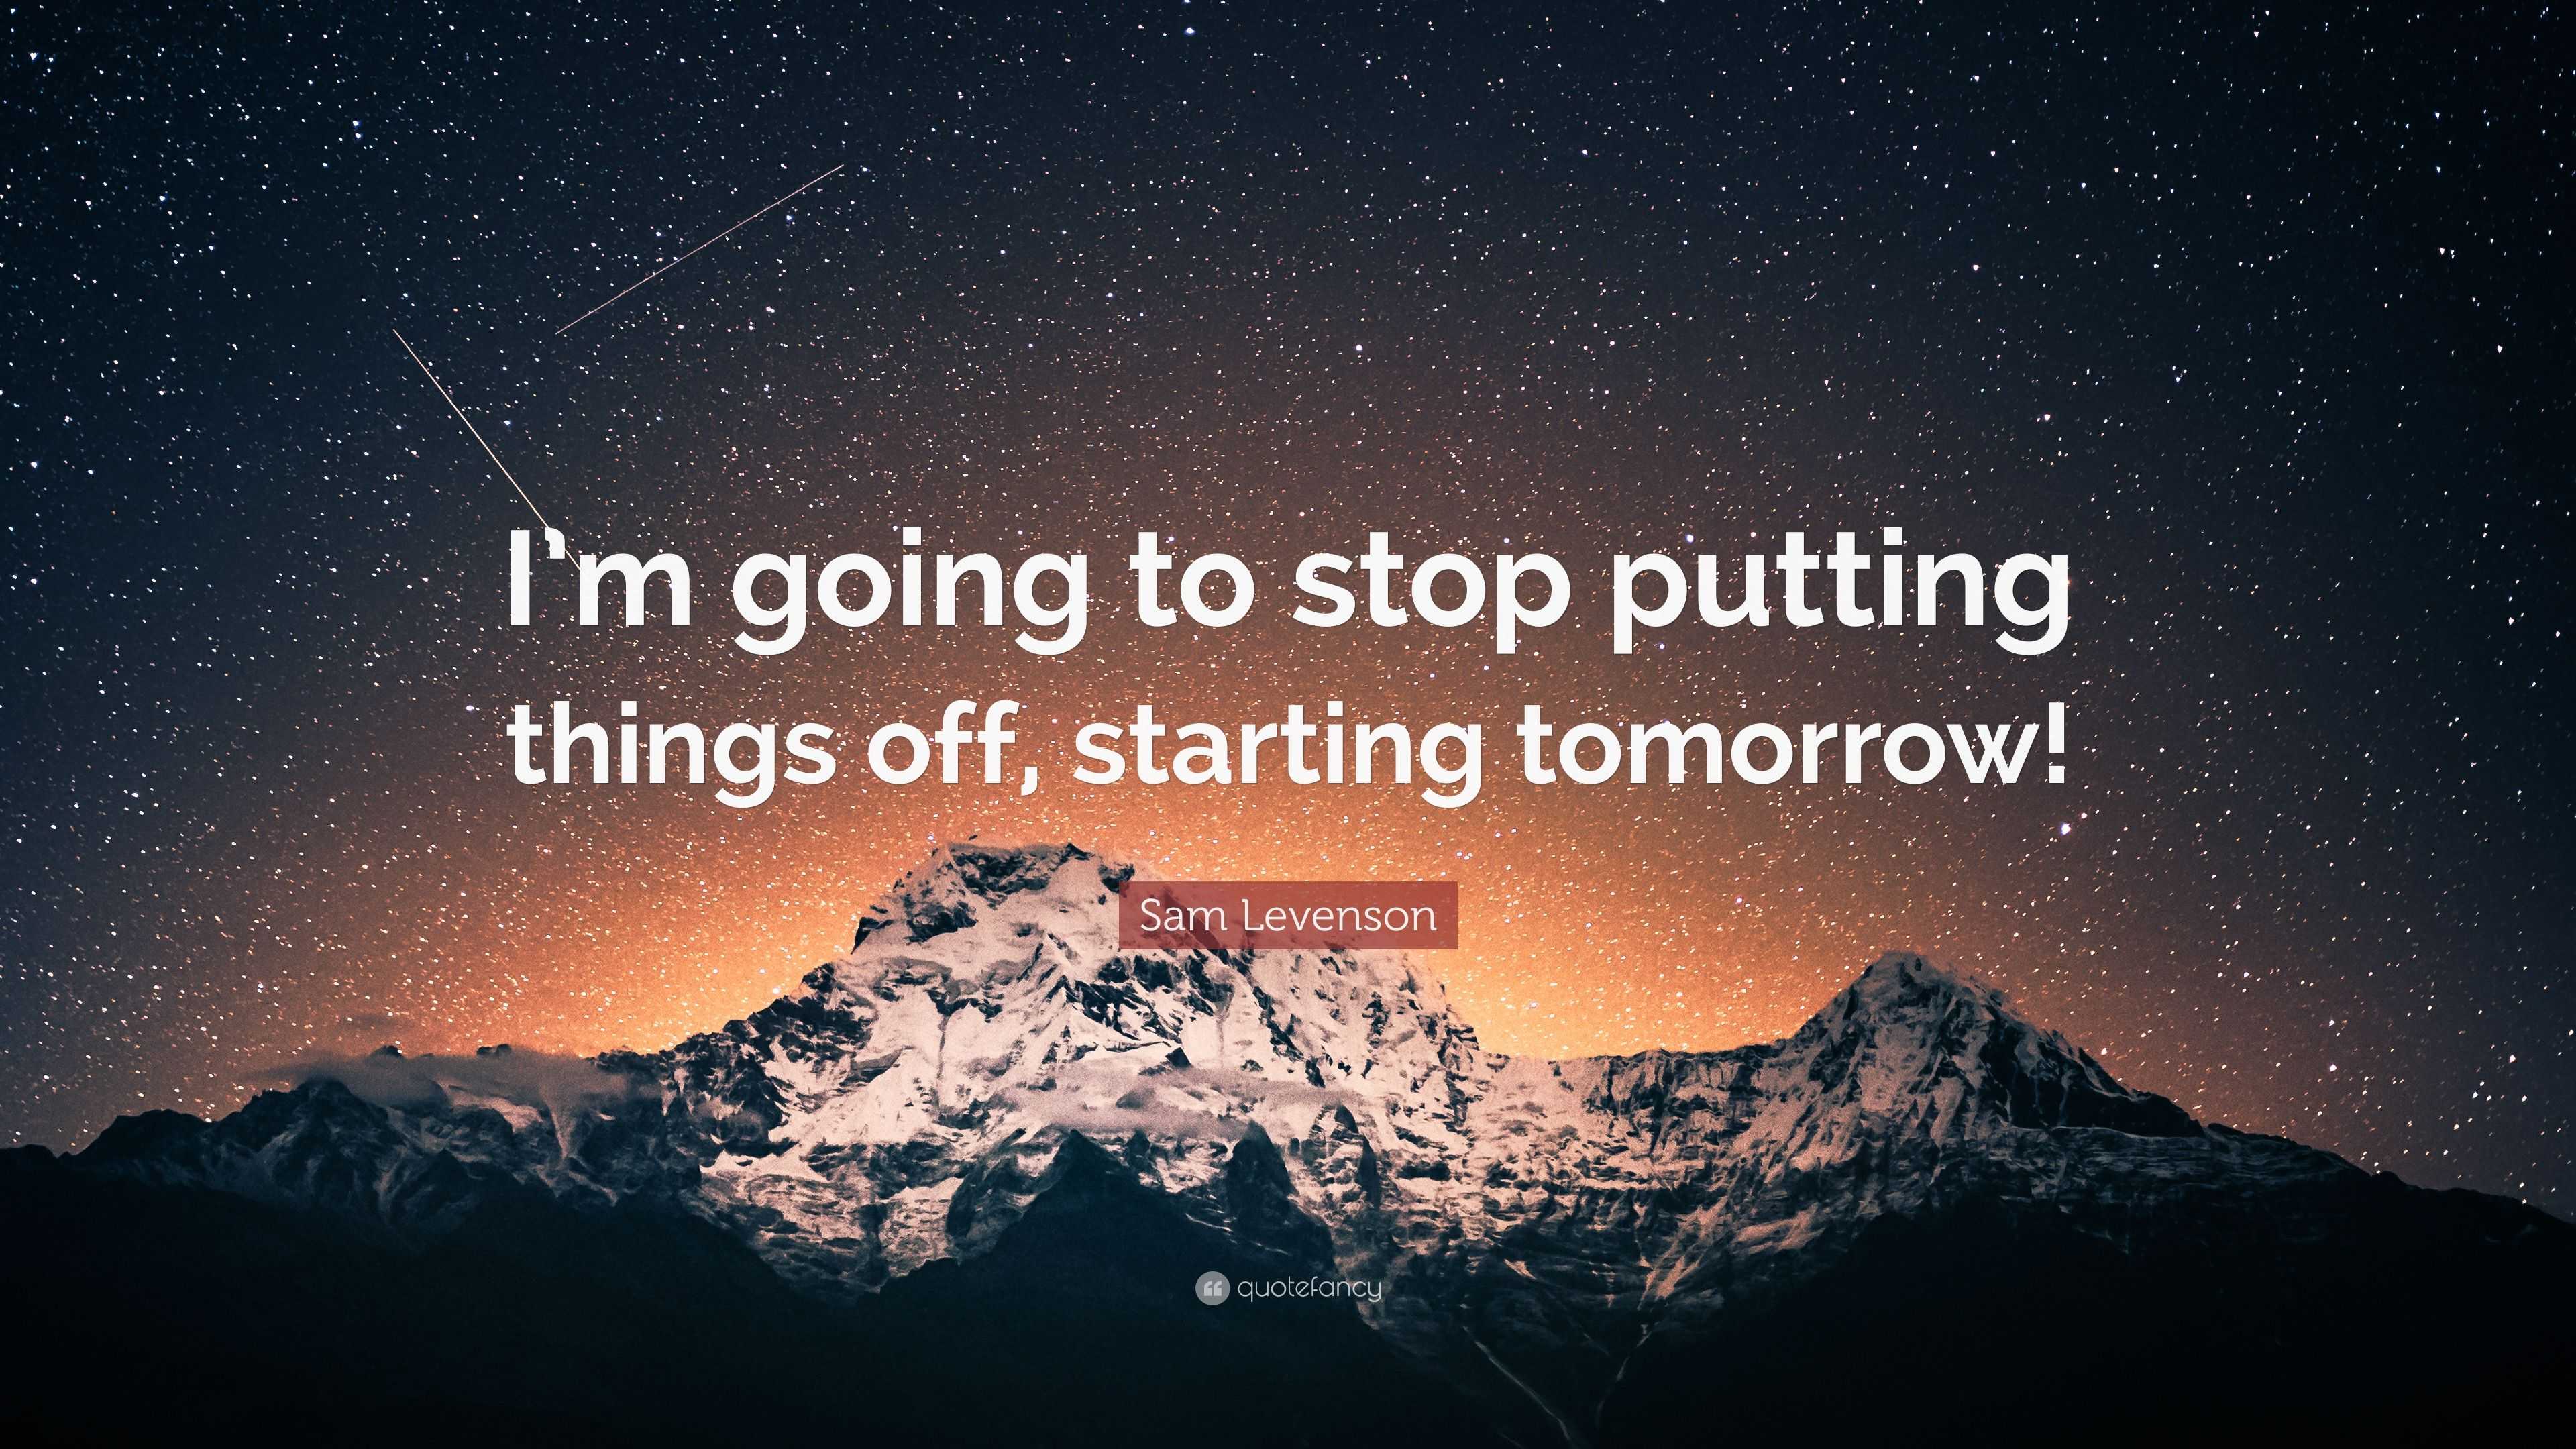 Sam Levenson Quote: “I’m going to stop putting things off, starting